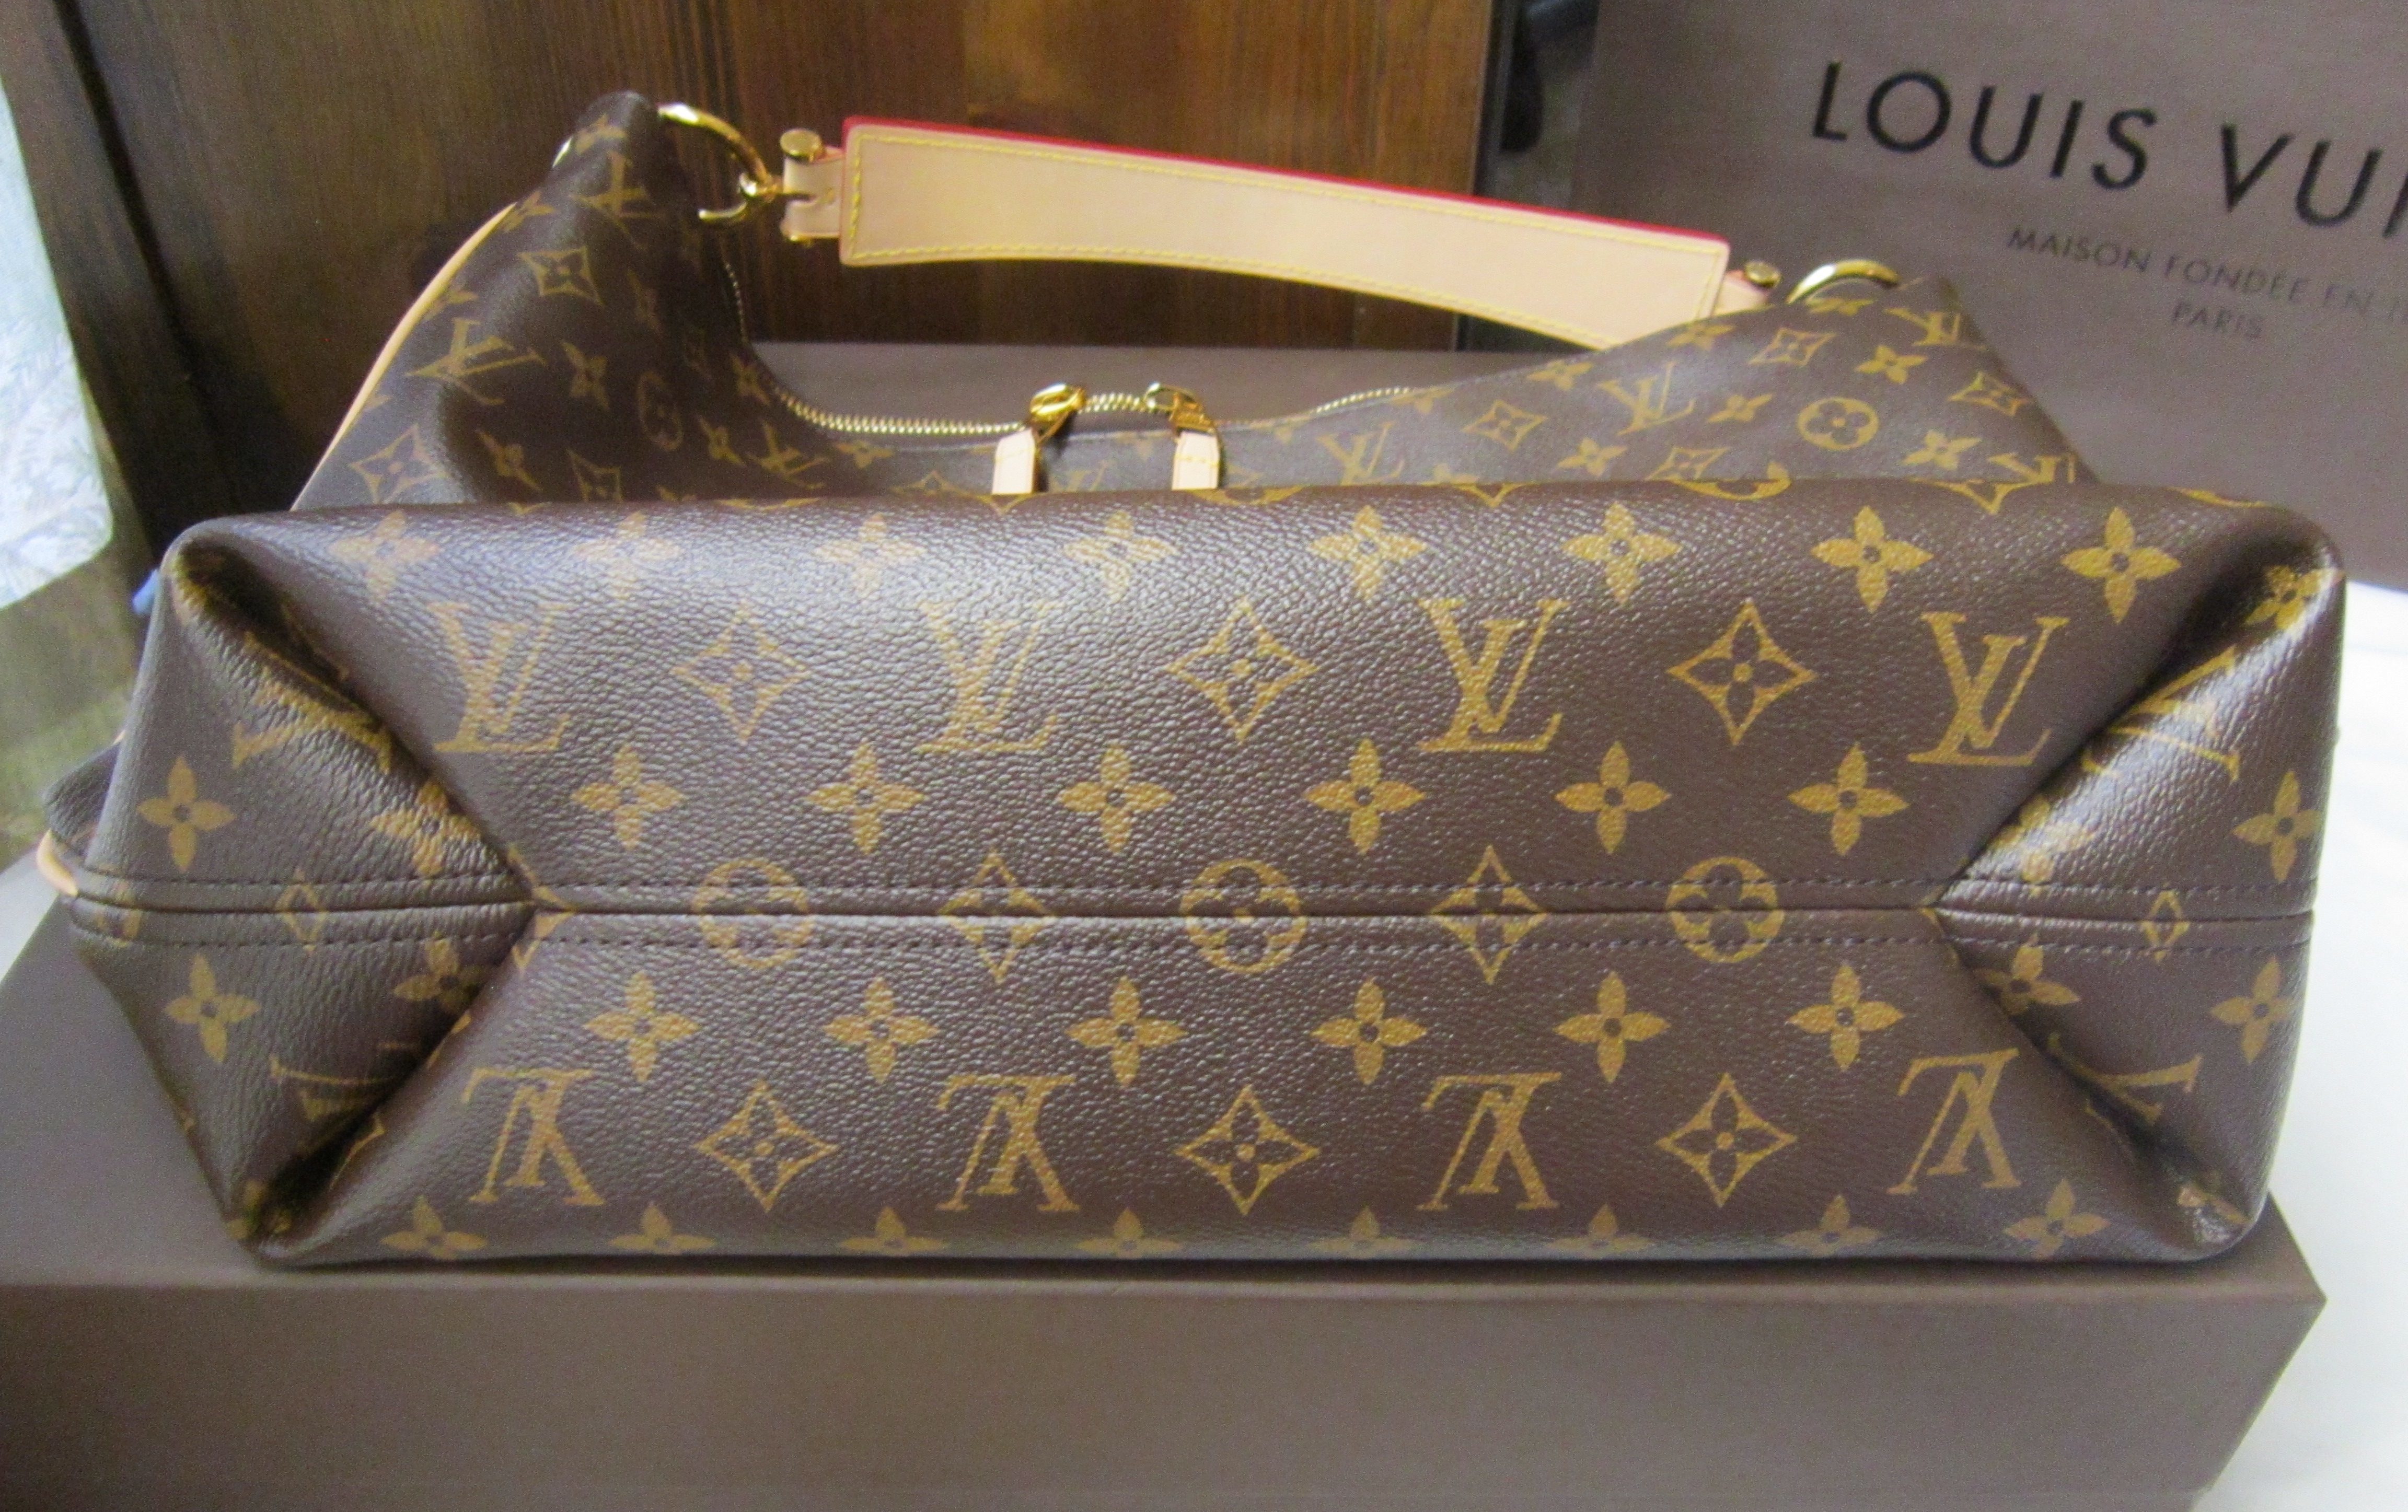 Top 138 Complaints and Reviews about Louis Vuitton | Page 2